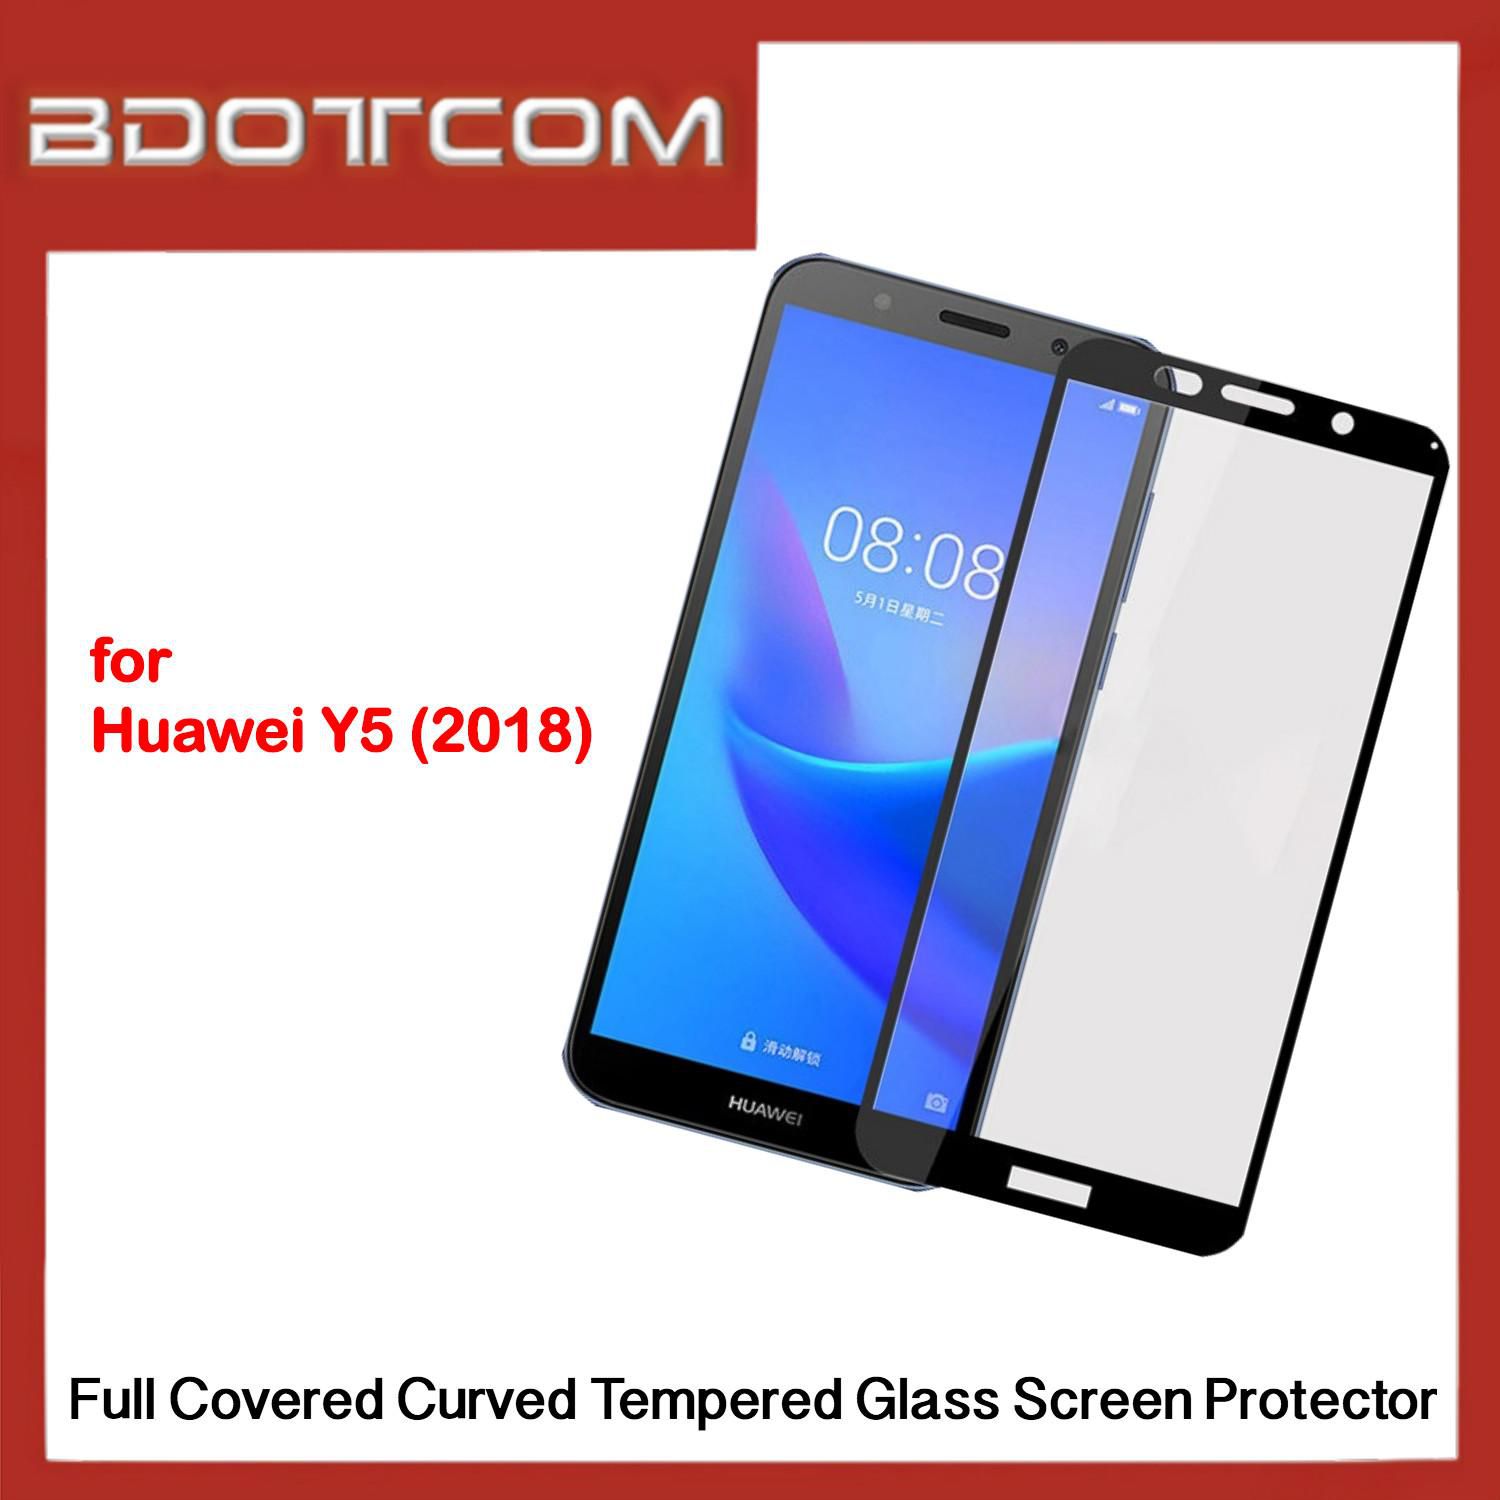 Bdotcom Full Covered Curved Glass Screen Protector for Huawei Y5 2018 (Black)